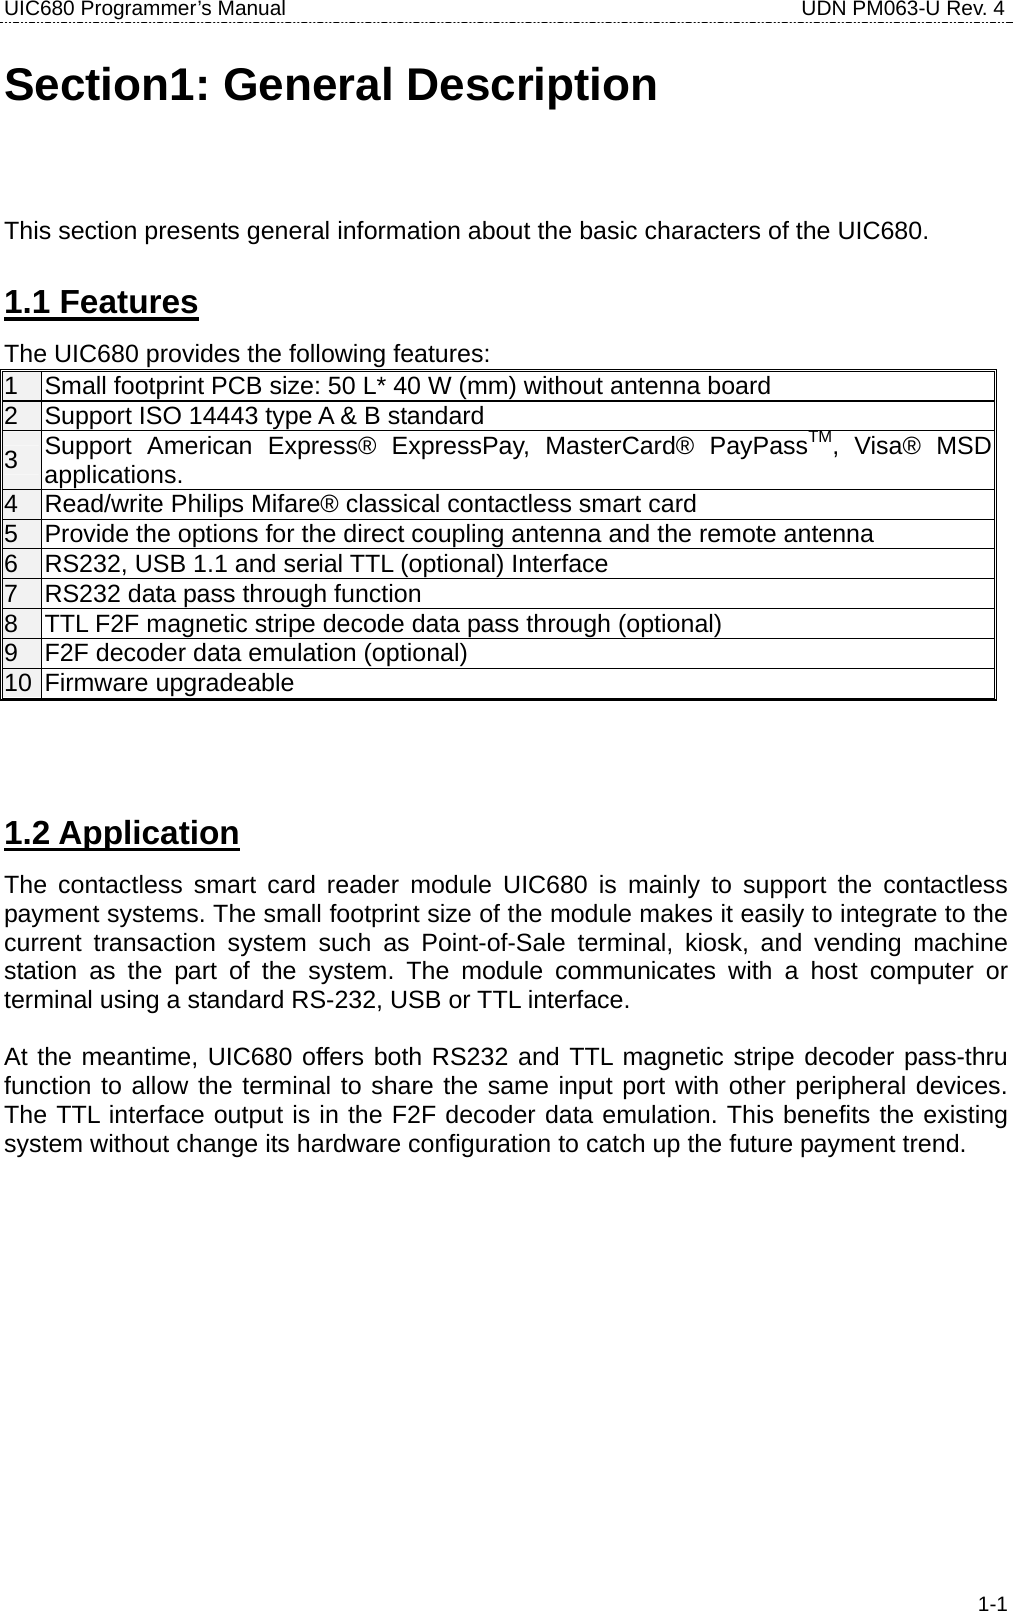 UIC680 Programmer’s Manual                                     UDN PM063-U Rev. 4  1-1Section1: General Description This section presents general information about the basic characters of the UIC680. 1.1 Features The UIC680 provides the following features: 1  Small footprint PCB size: 50 L* 40 W (mm) without antenna board 2  Support ISO 14443 type A &amp; B standard 3  Support American Express® ExpressPay, MasterCard® PayPassTM, Visa® MSD applications. 4  Read/write Philips Mifare® classical contactless smart card 5  Provide the options for the direct coupling antenna and the remote antenna 6  RS232, USB 1.1 and serial TTL (optional) Interface 7  RS232 data pass through function 8  TTL F2F magnetic stripe decode data pass through (optional) 9  F2F decoder data emulation (optional) 10 Firmware upgradeable   1.2 Application The contactless smart card reader module UIC680 is mainly to support the contactless payment systems. The small footprint size of the module makes it easily to integrate to the current transaction system such as Point-of-Sale terminal, kiosk, and vending machine station as the part of the system. The module communicates with a host computer or terminal using a standard RS-232, USB or TTL interface.  At the meantime, UIC680 offers both RS232 and TTL magnetic stripe decoder pass-thru function to allow the terminal to share the same input port with other peripheral devices. The TTL interface output is in the F2F decoder data emulation. This benefits the existing system without change its hardware configuration to catch up the future payment trend.   